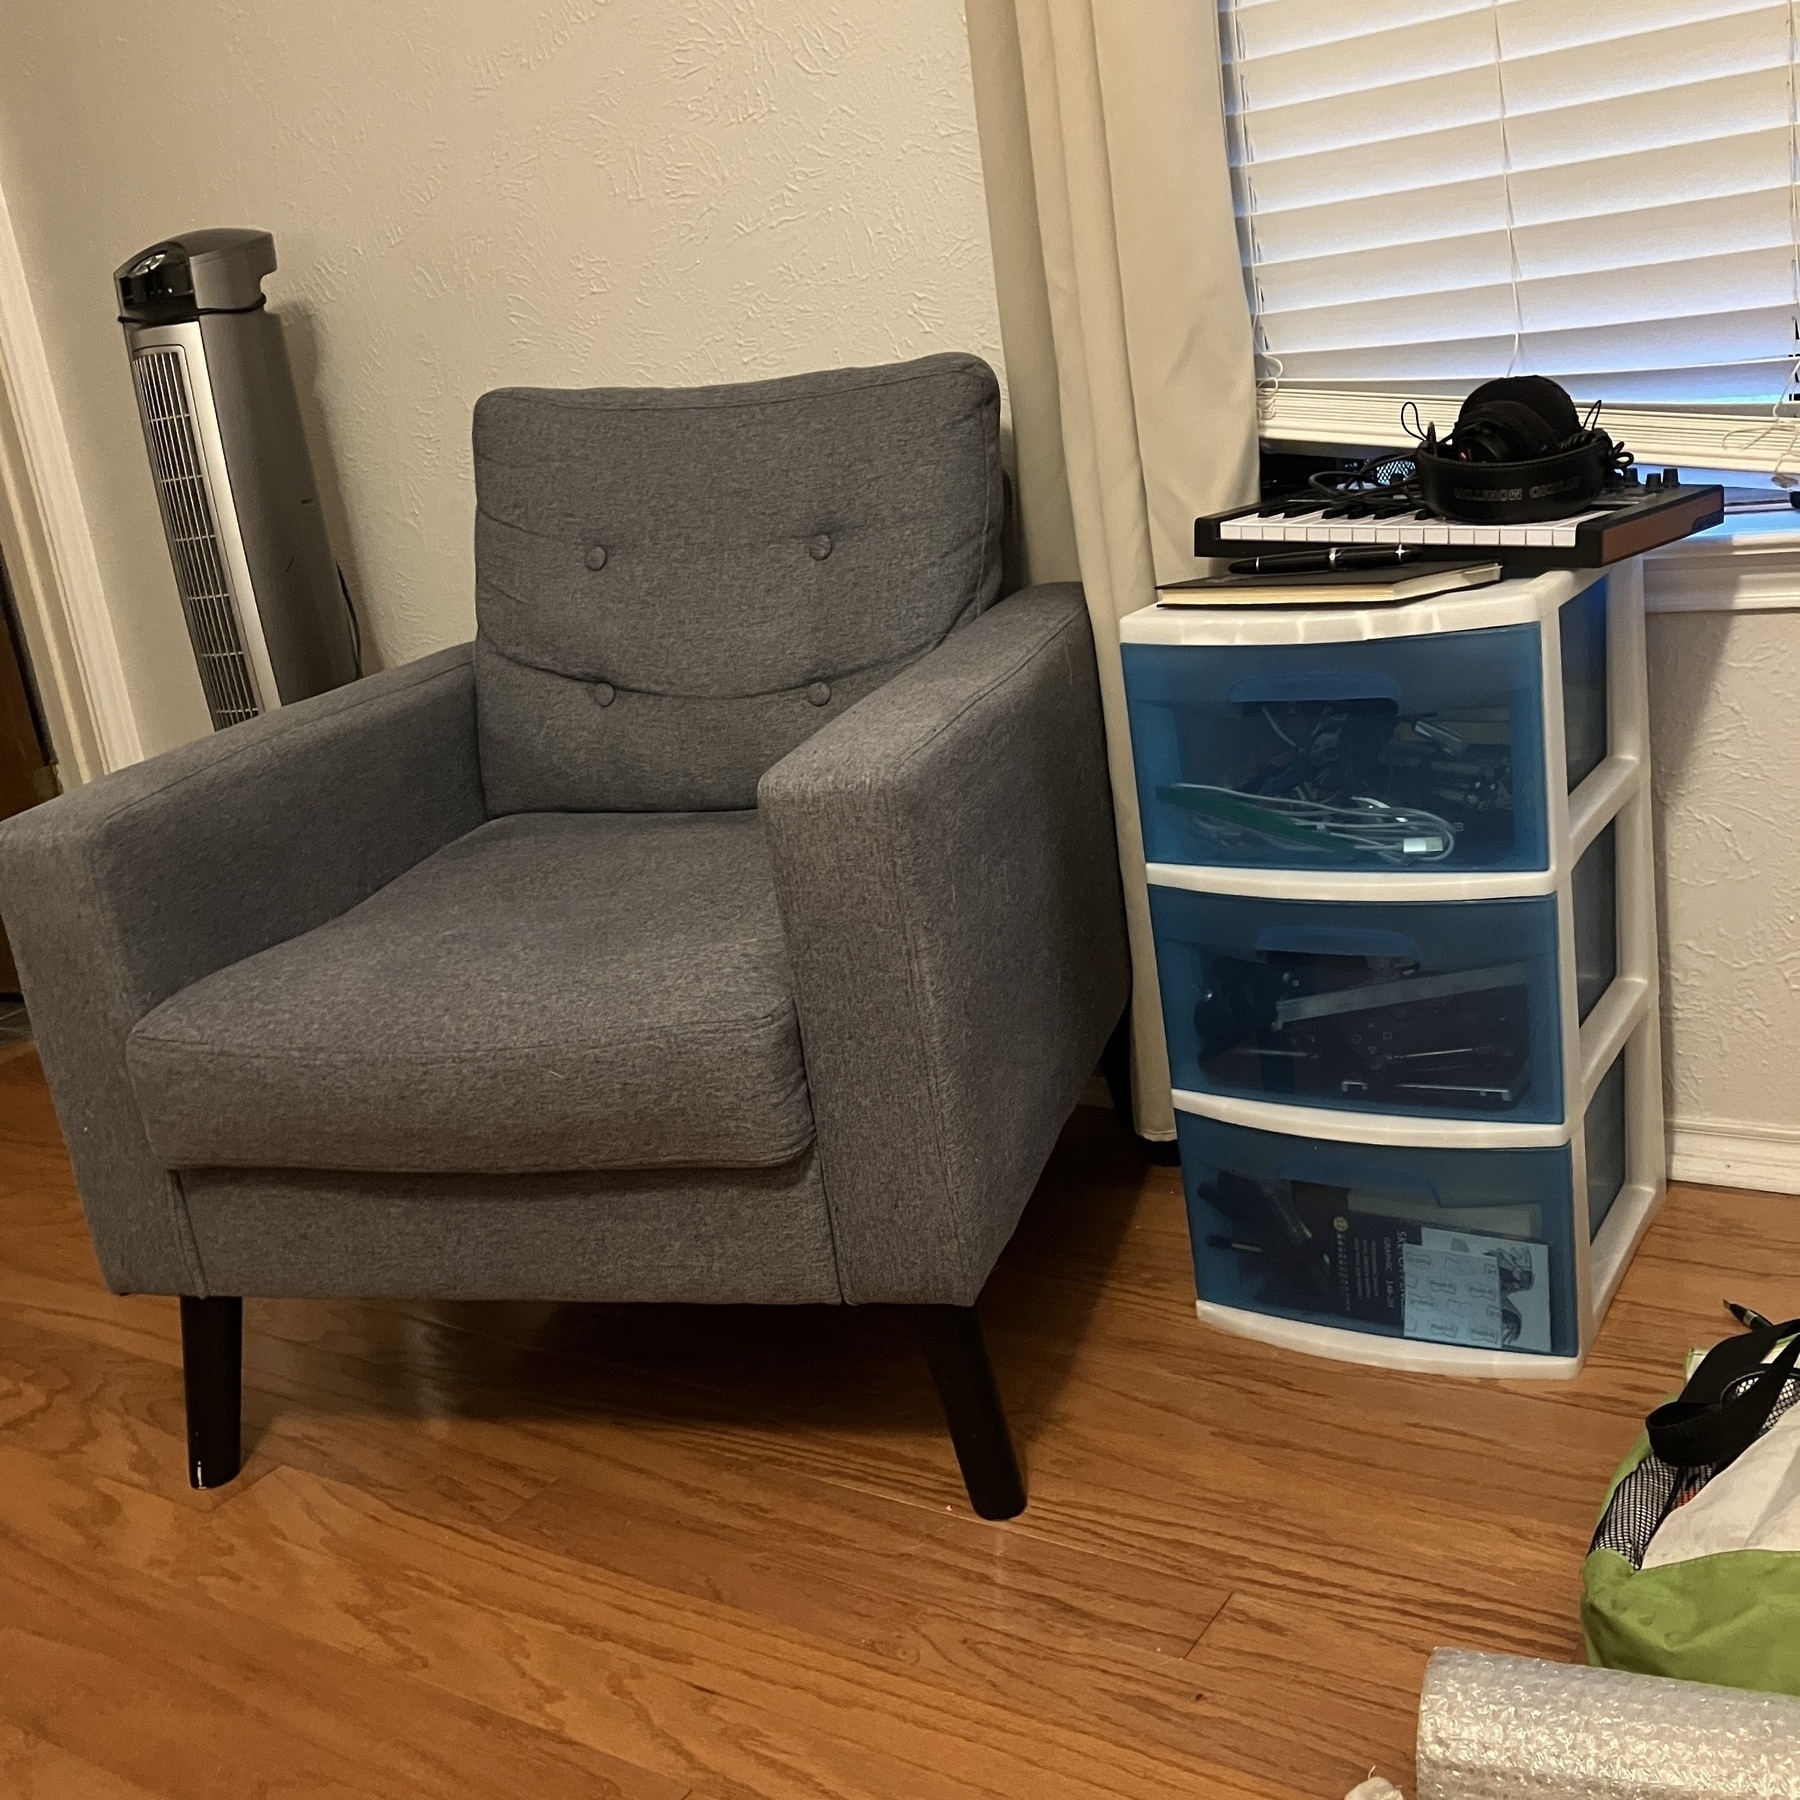 Auto-generated description: A gray armchair is situated next to a white storage unit with several shelves containing electronics and personal items, placed near a window with curtains.